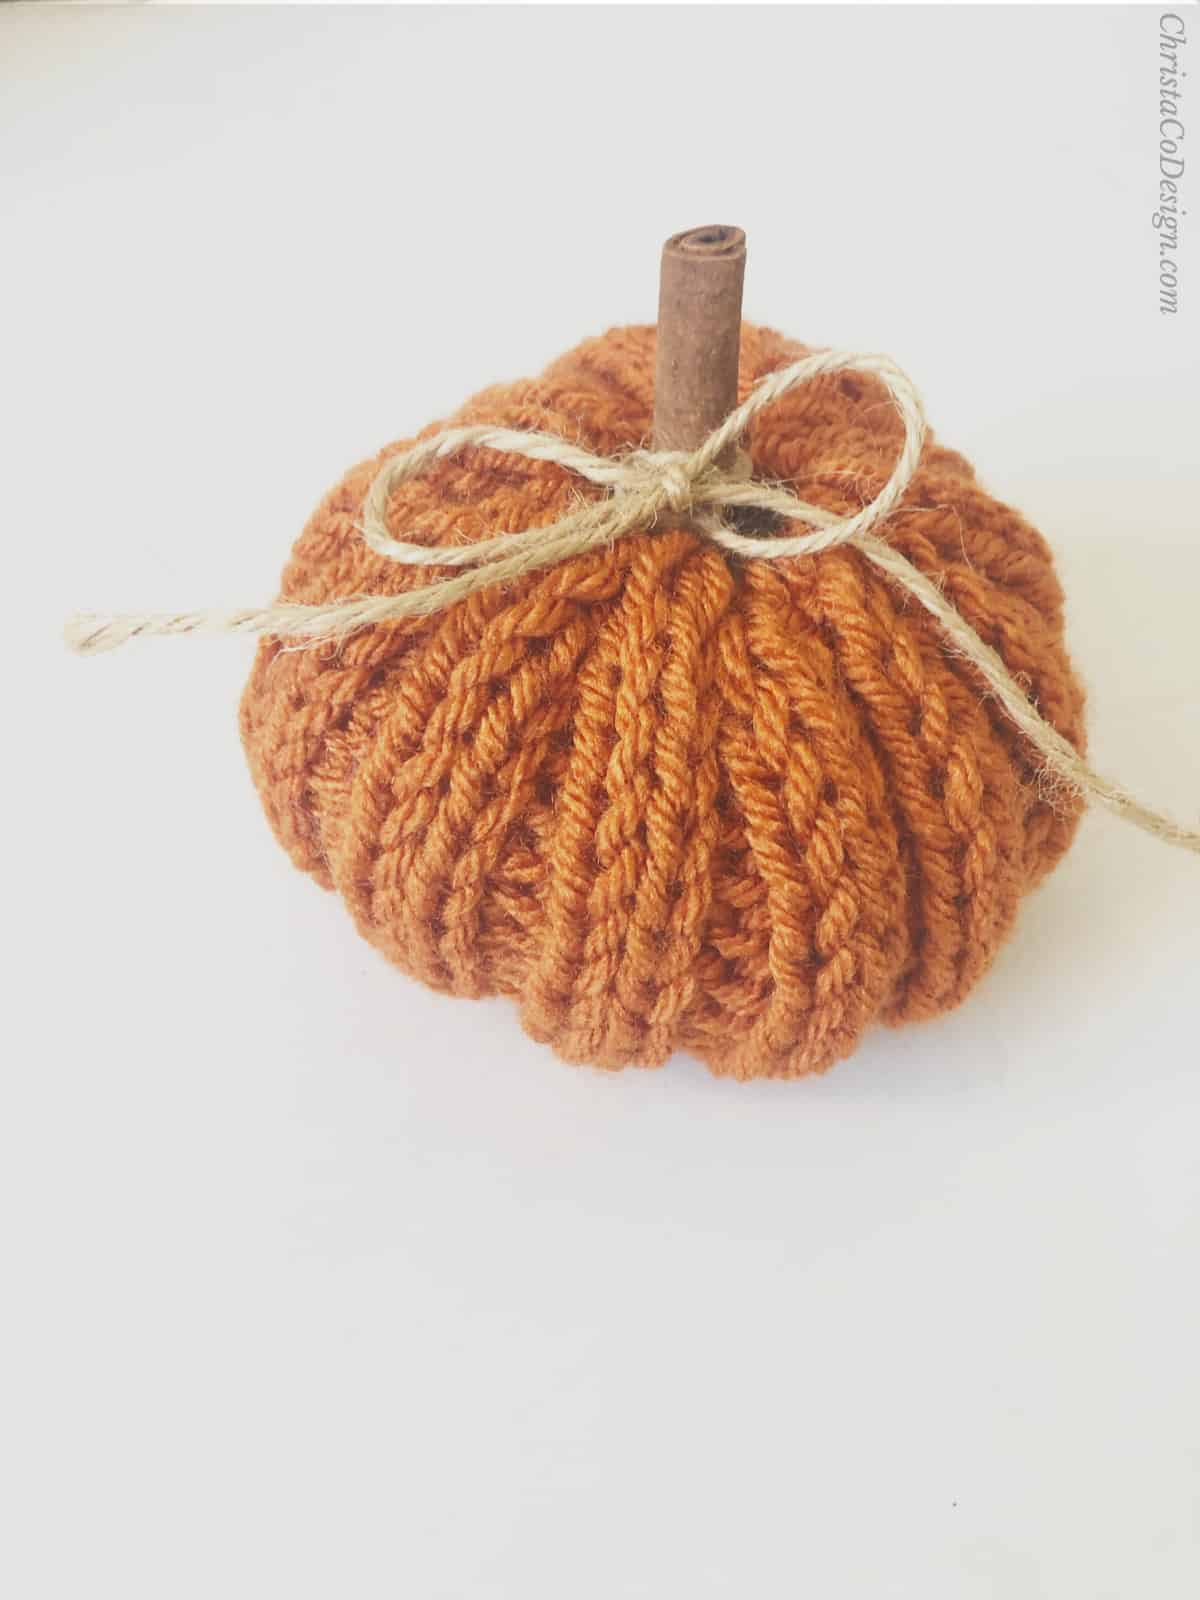 Knit pumpkin in rustic orange with cinnamons stitch for stem and twine bow.